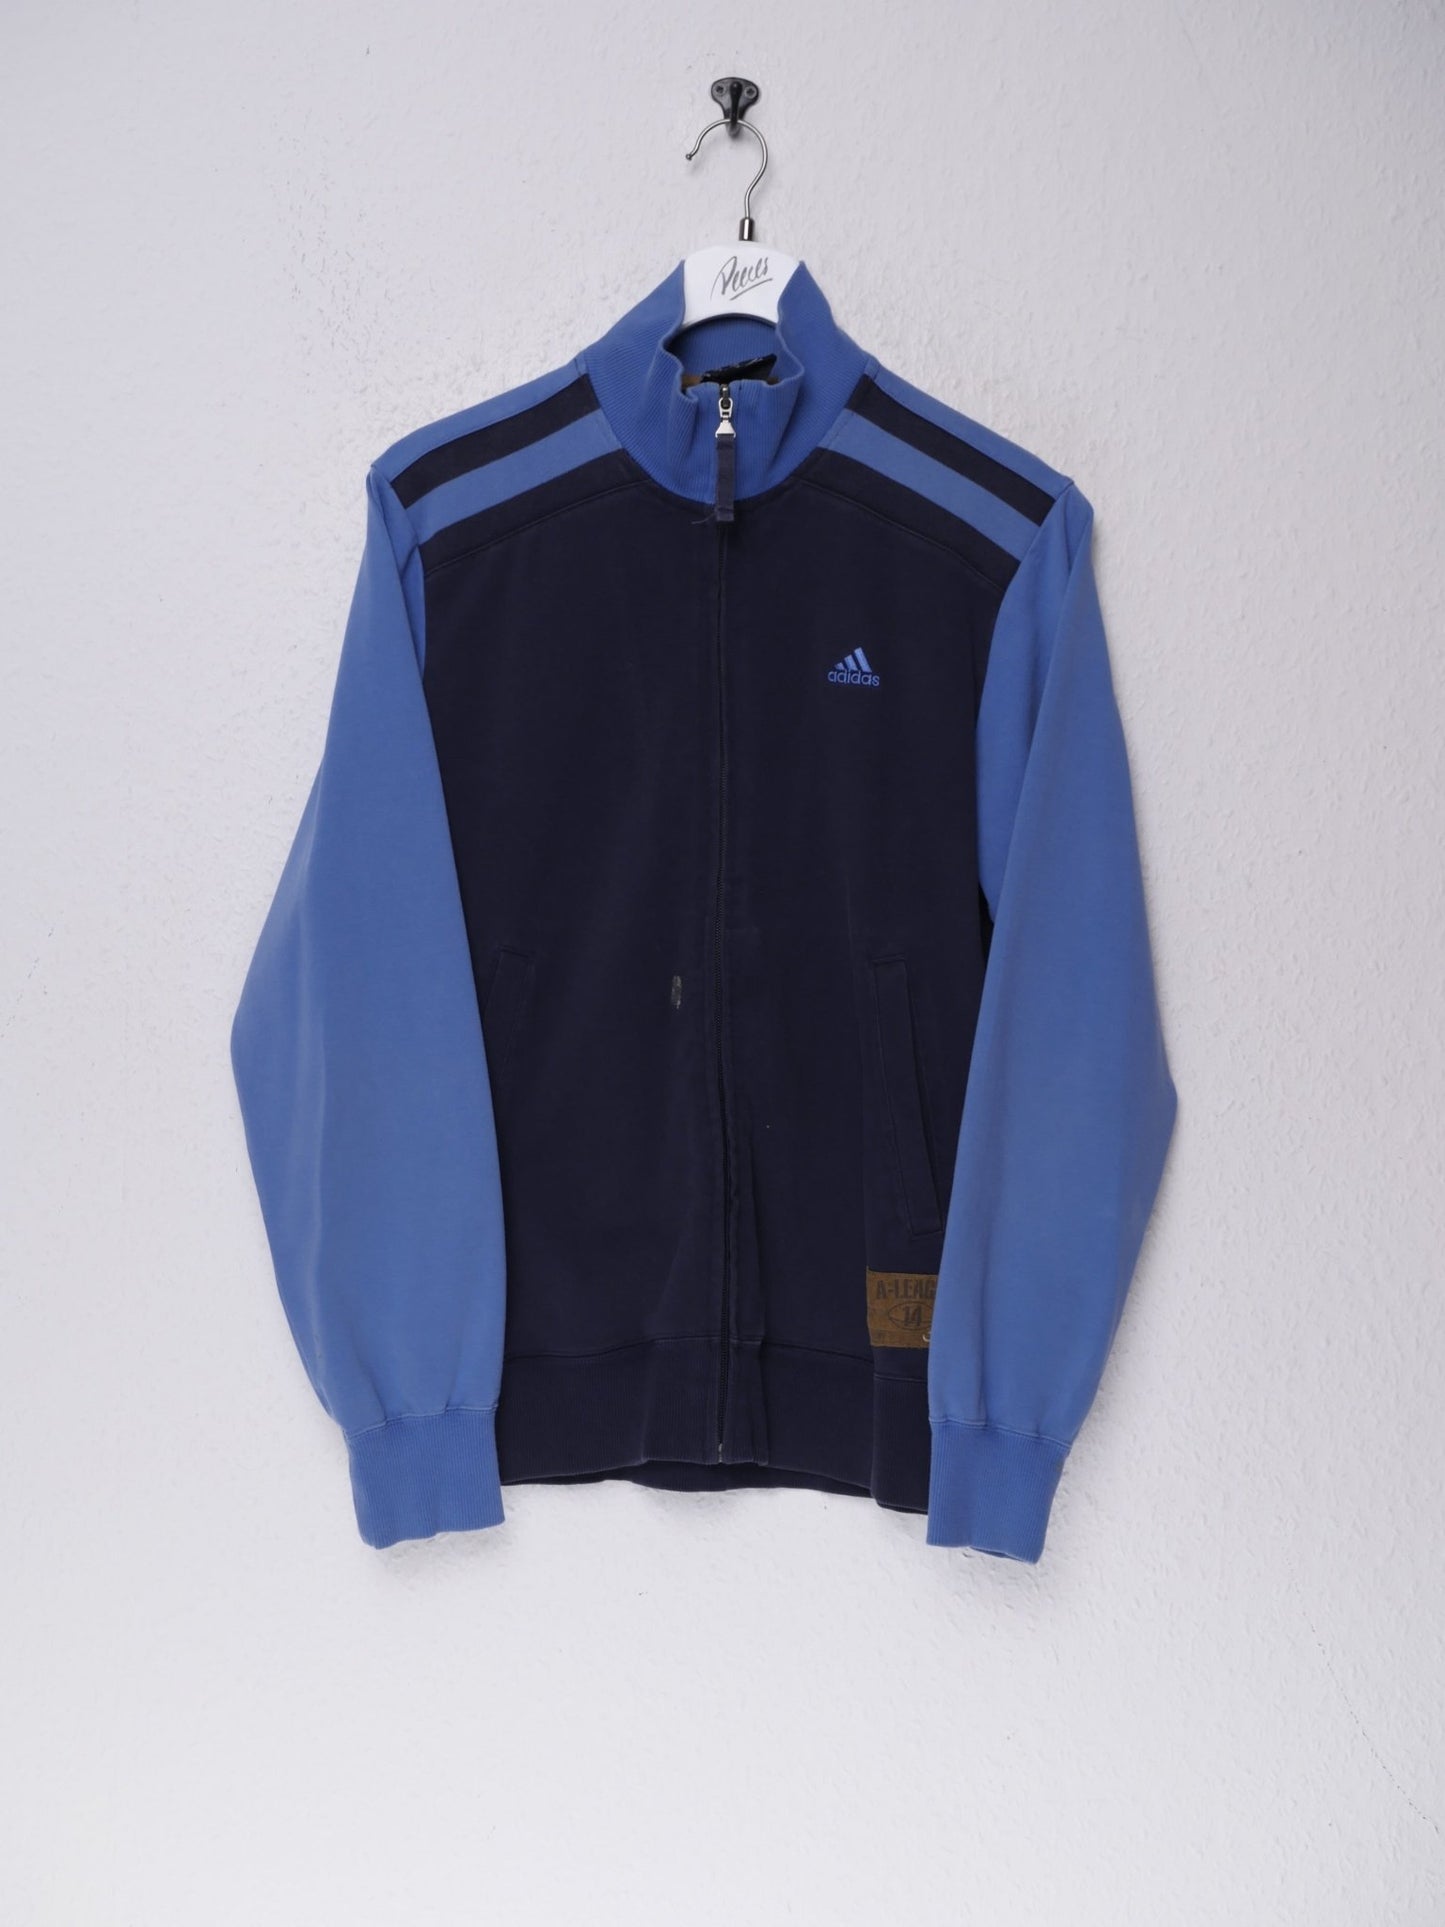 Adidas embroidered Logo two toned Zip Sweater - Peeces